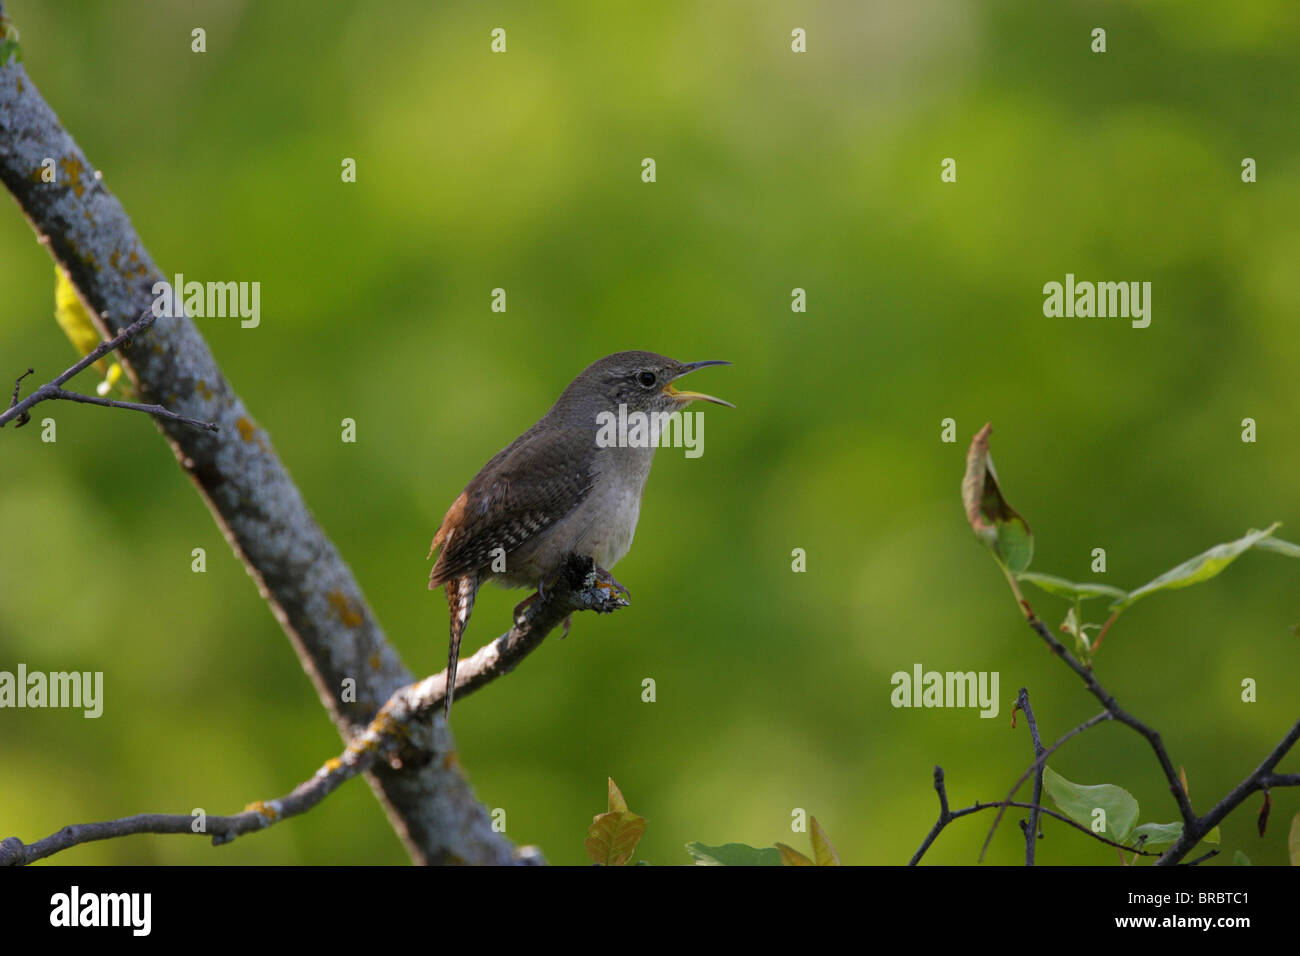 House Wren Troglodytes aedon perched on a tree branch singing with its beak open Stock Photo